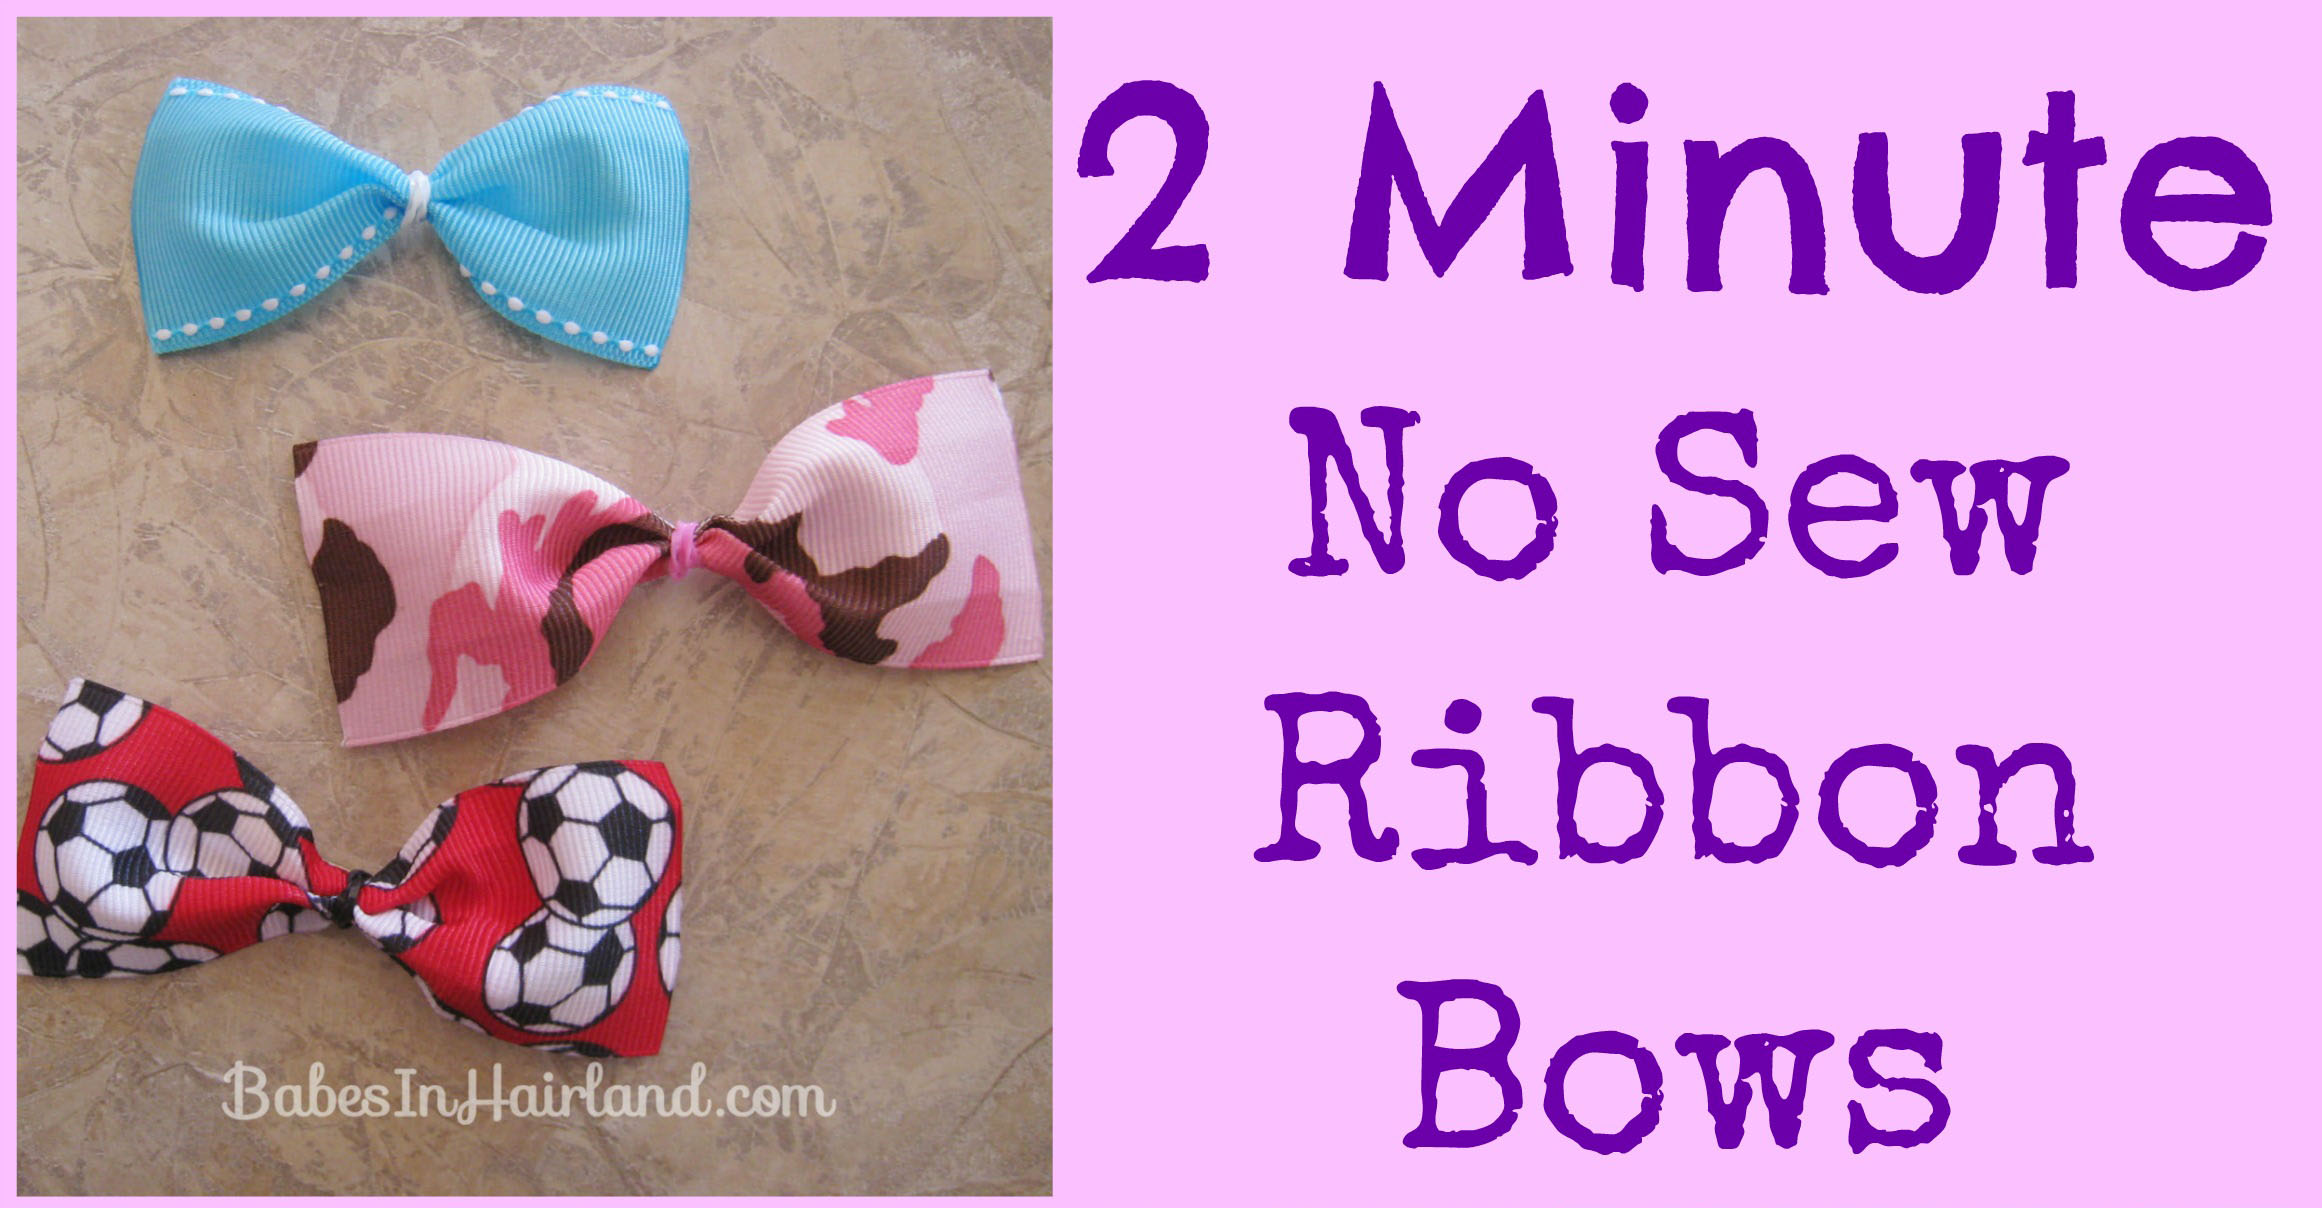 2 Minute No Sew Ribbon Bows - Babes In Hairland